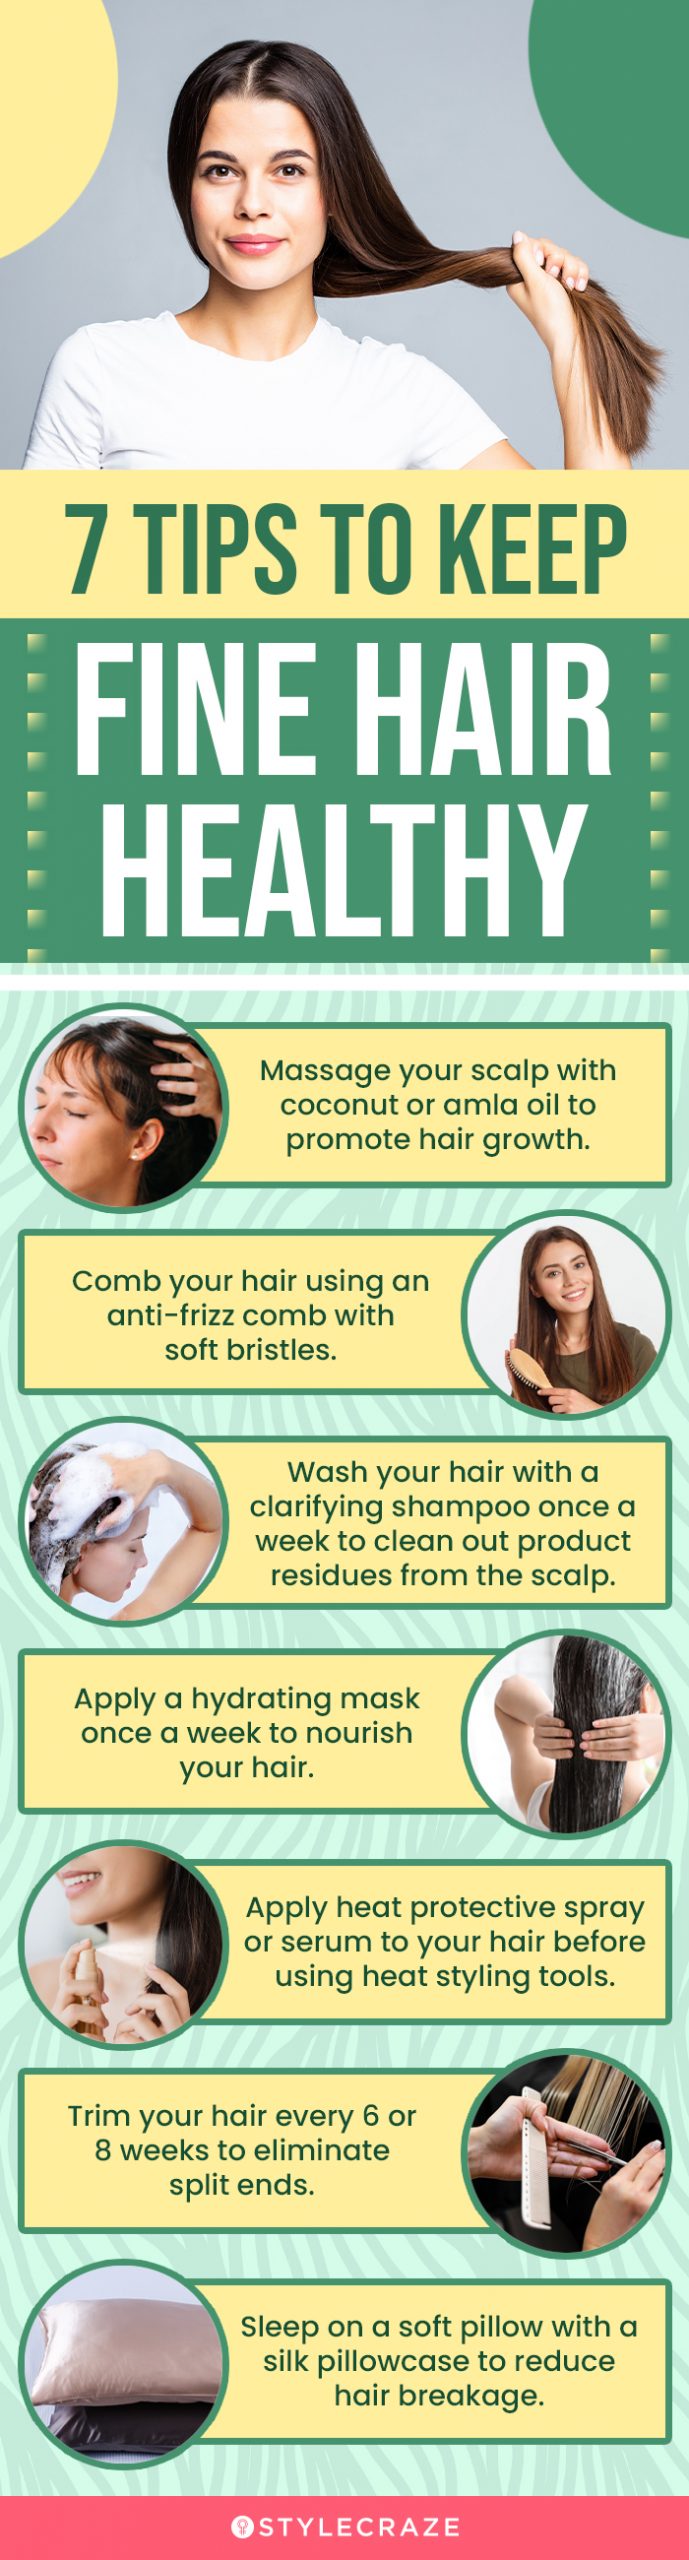 Tips To Maintain Fine Hair (infographic)